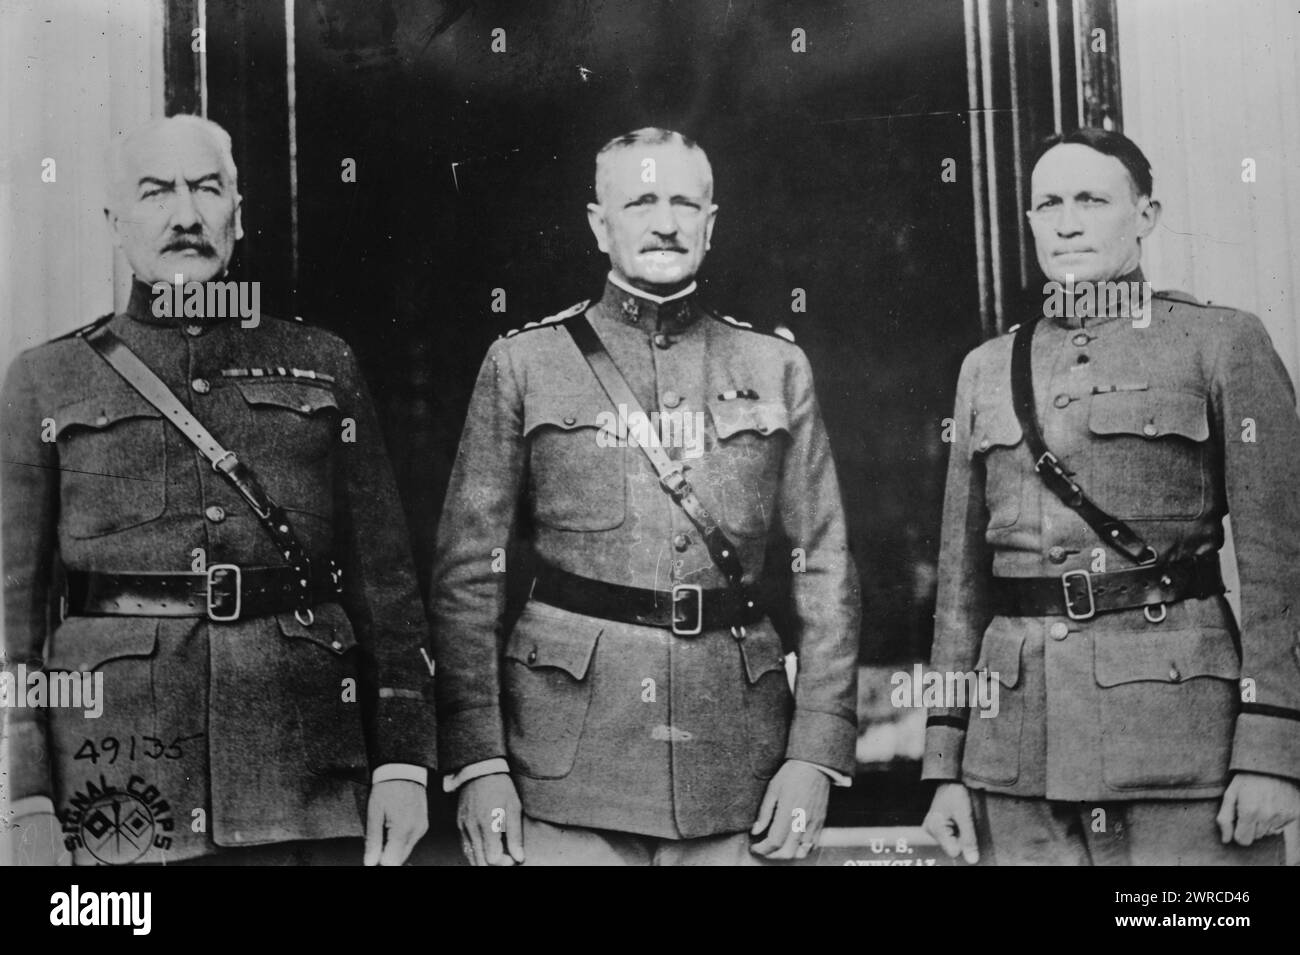 Maj. Gen. G.W. Read, Gen. Pershing, Brig. Gen. G.S. Simons, Photograph shows Major General George Windle Read (1860-1934), General John J. 'Black Jack' Pershing (1860-1948), who served as head of the American Expeditionary Forces in World War I; and Brigadier General George Sherwin Simonds (1874-1938) at Bonnetable, Sarthe, France, January 21, 1919., 1919 Jan. 21, Glass negatives, 1 negative: glass Stock Photo